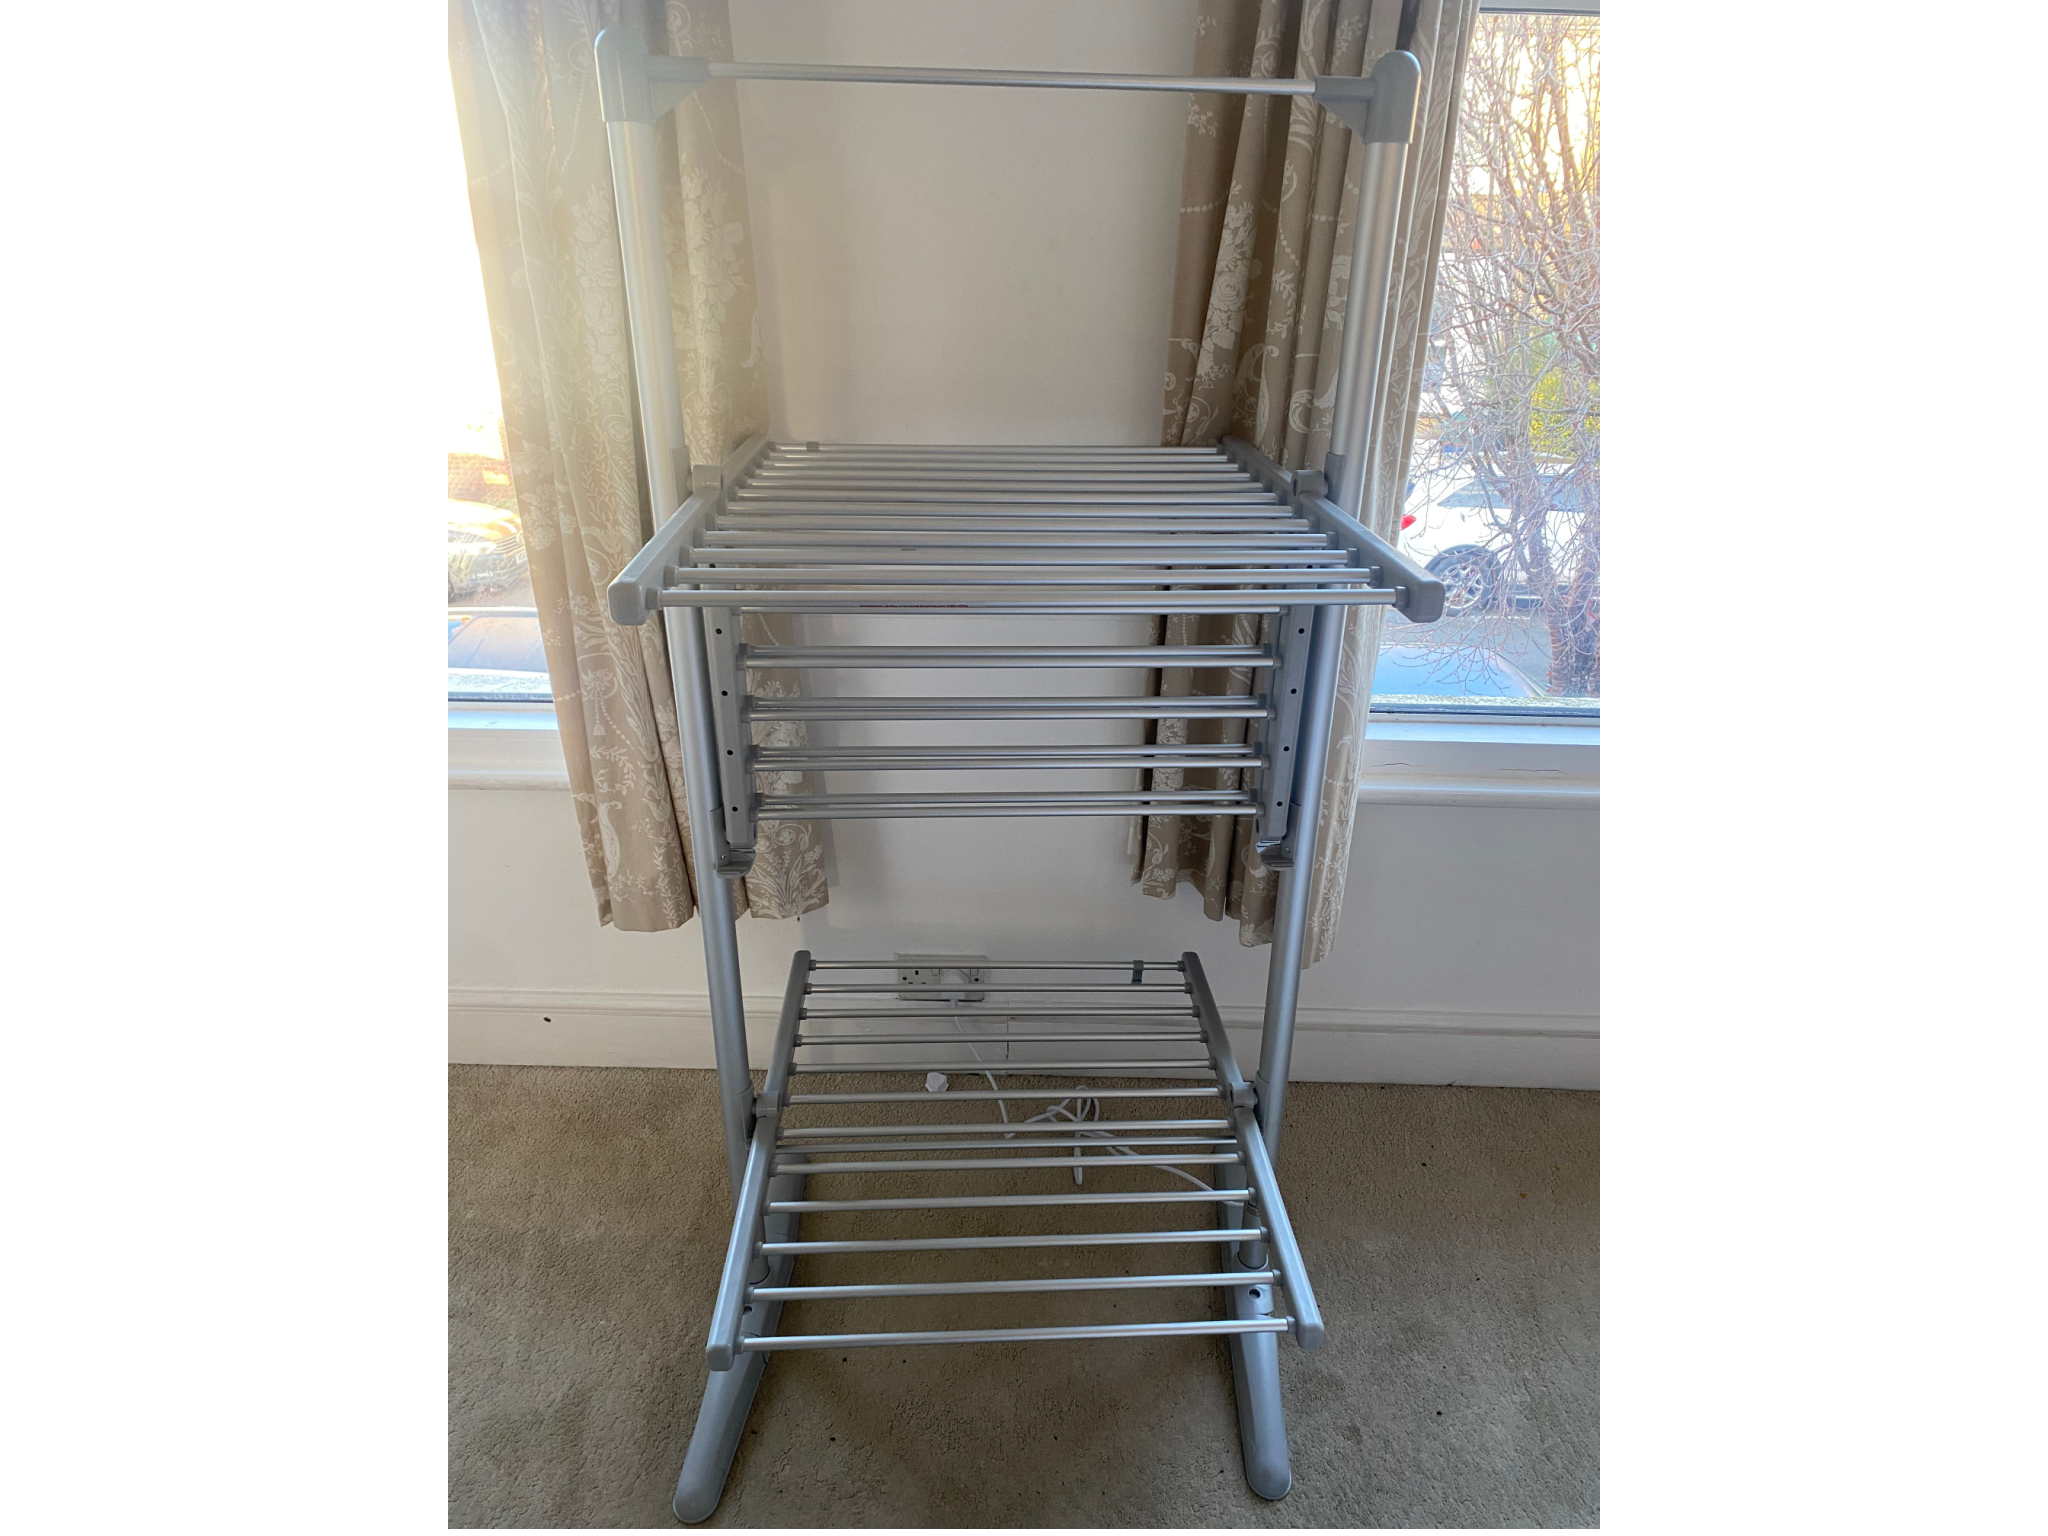 Beldray 3-tier heated airer